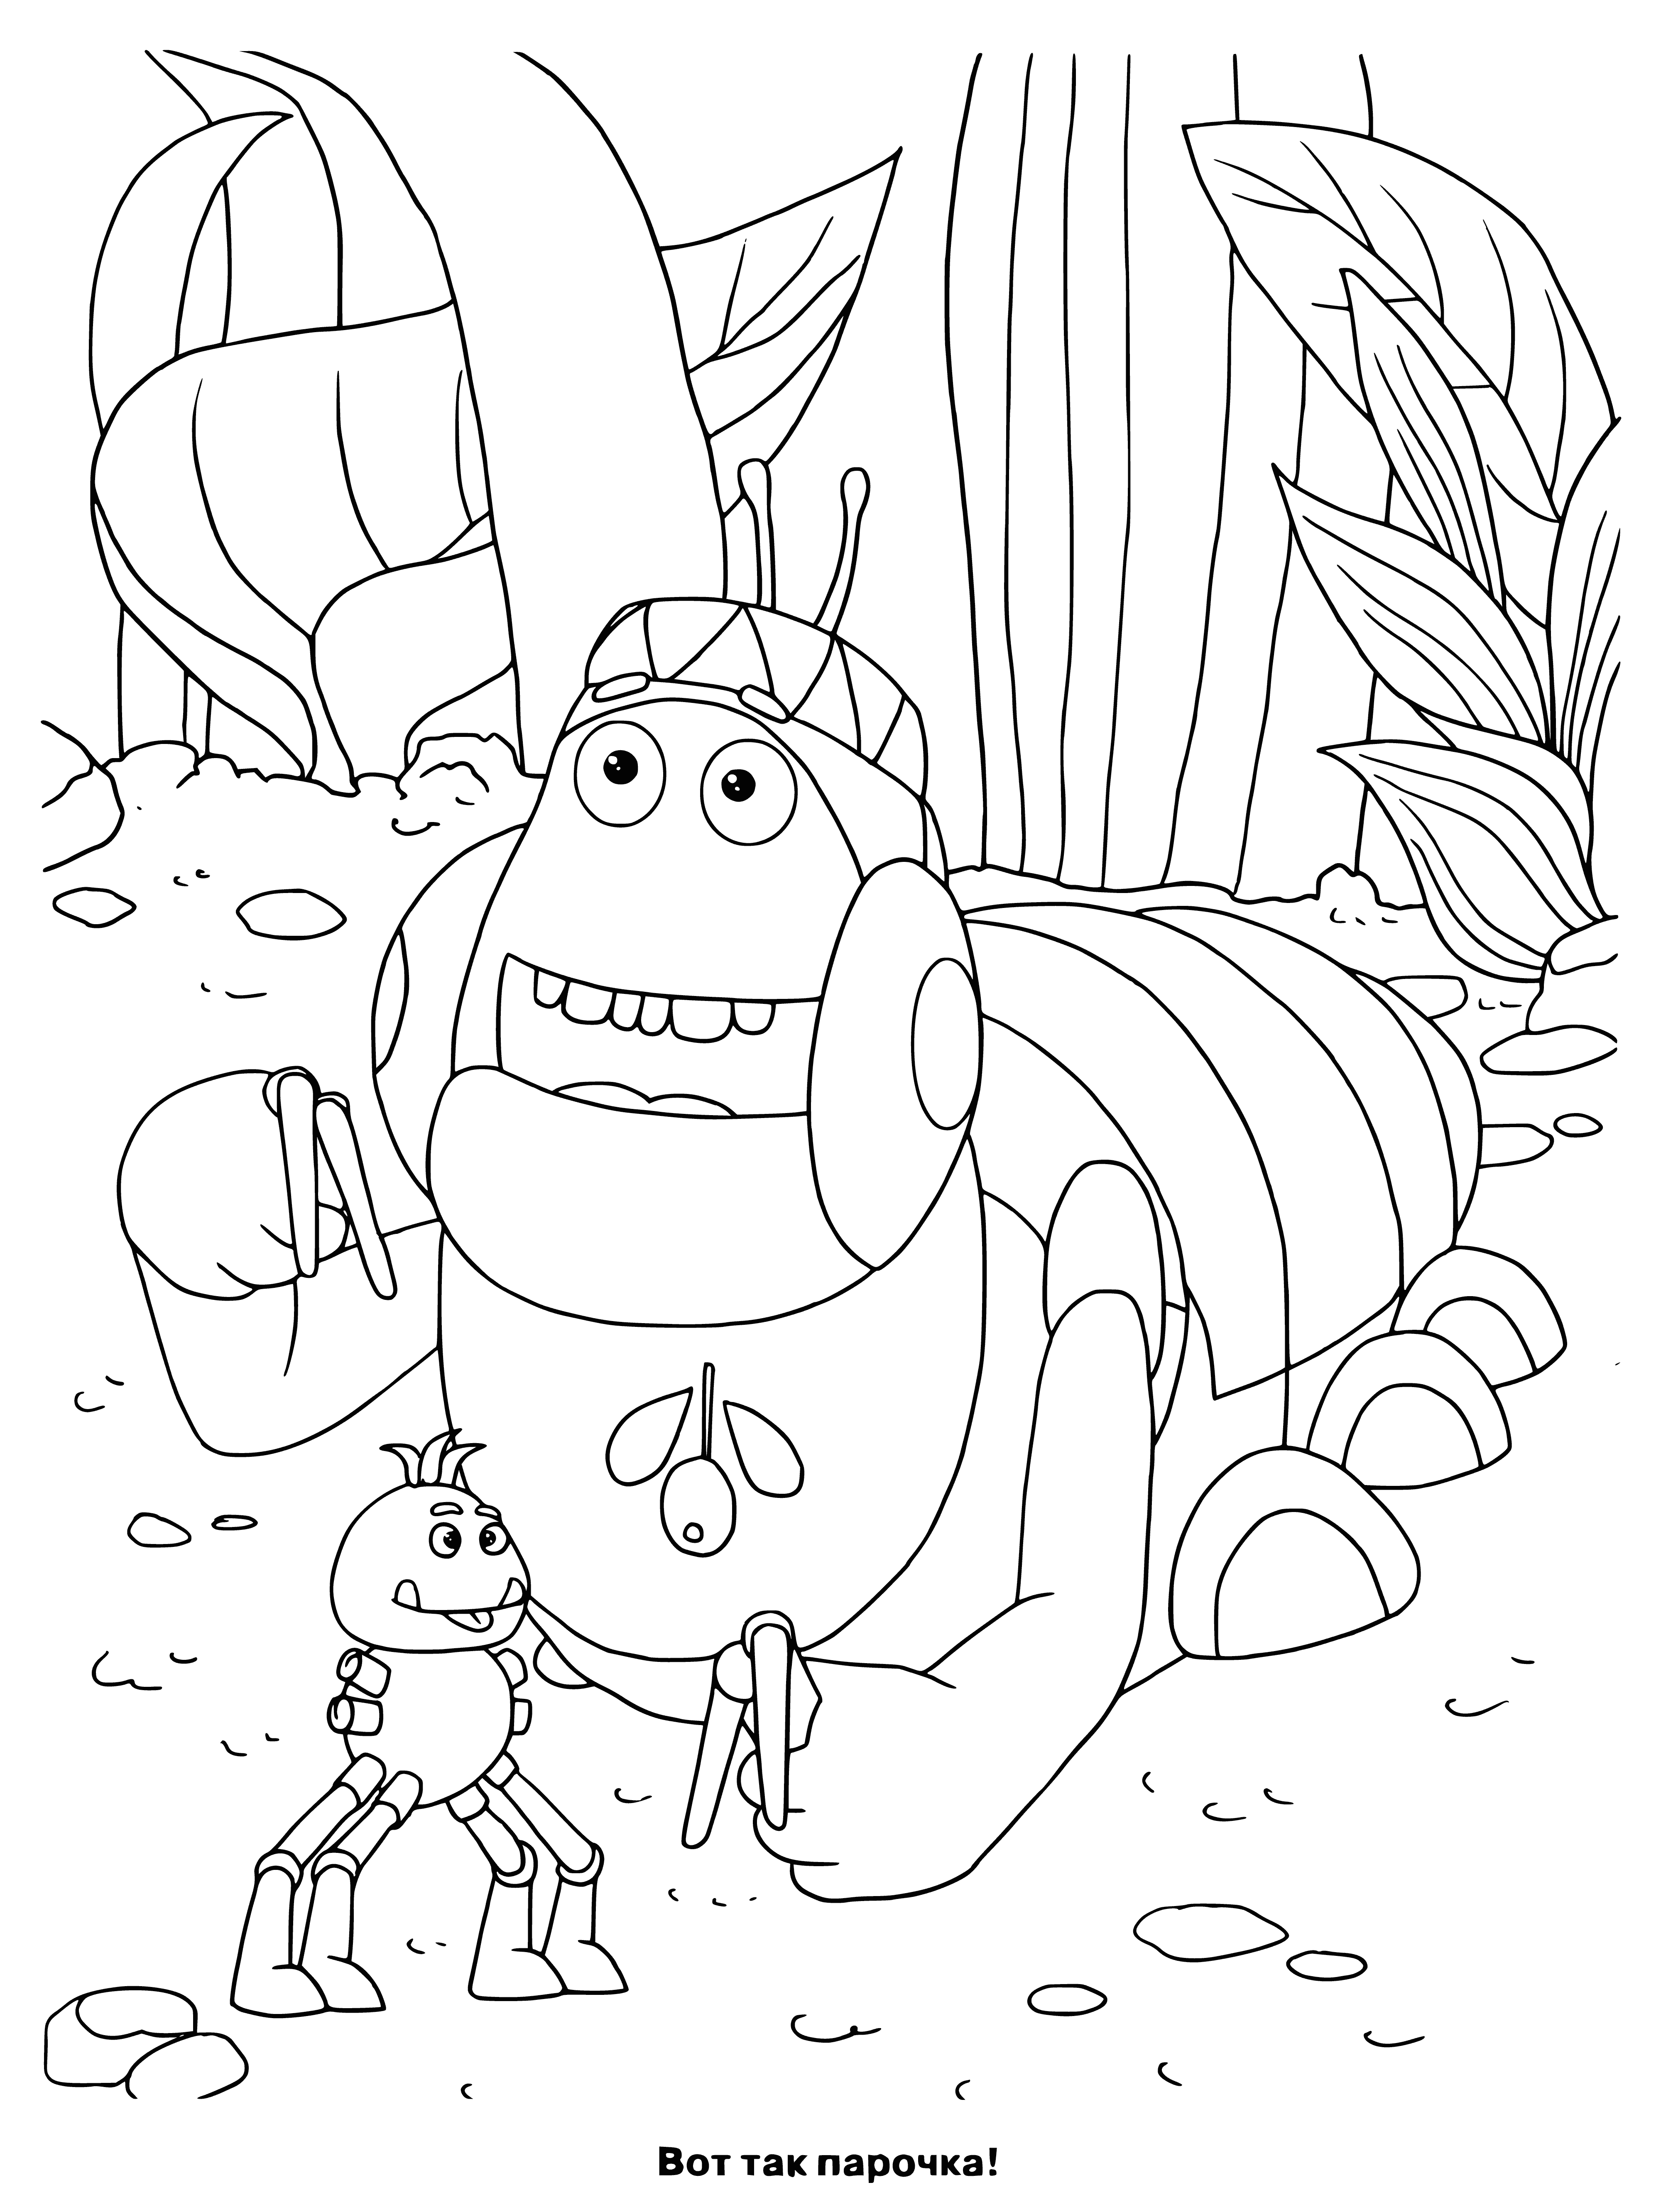 coloring page: A cheerful yellow creature holds a red ball among two frowning orange friends with blue noses, black eyes, & thin arms/legs.